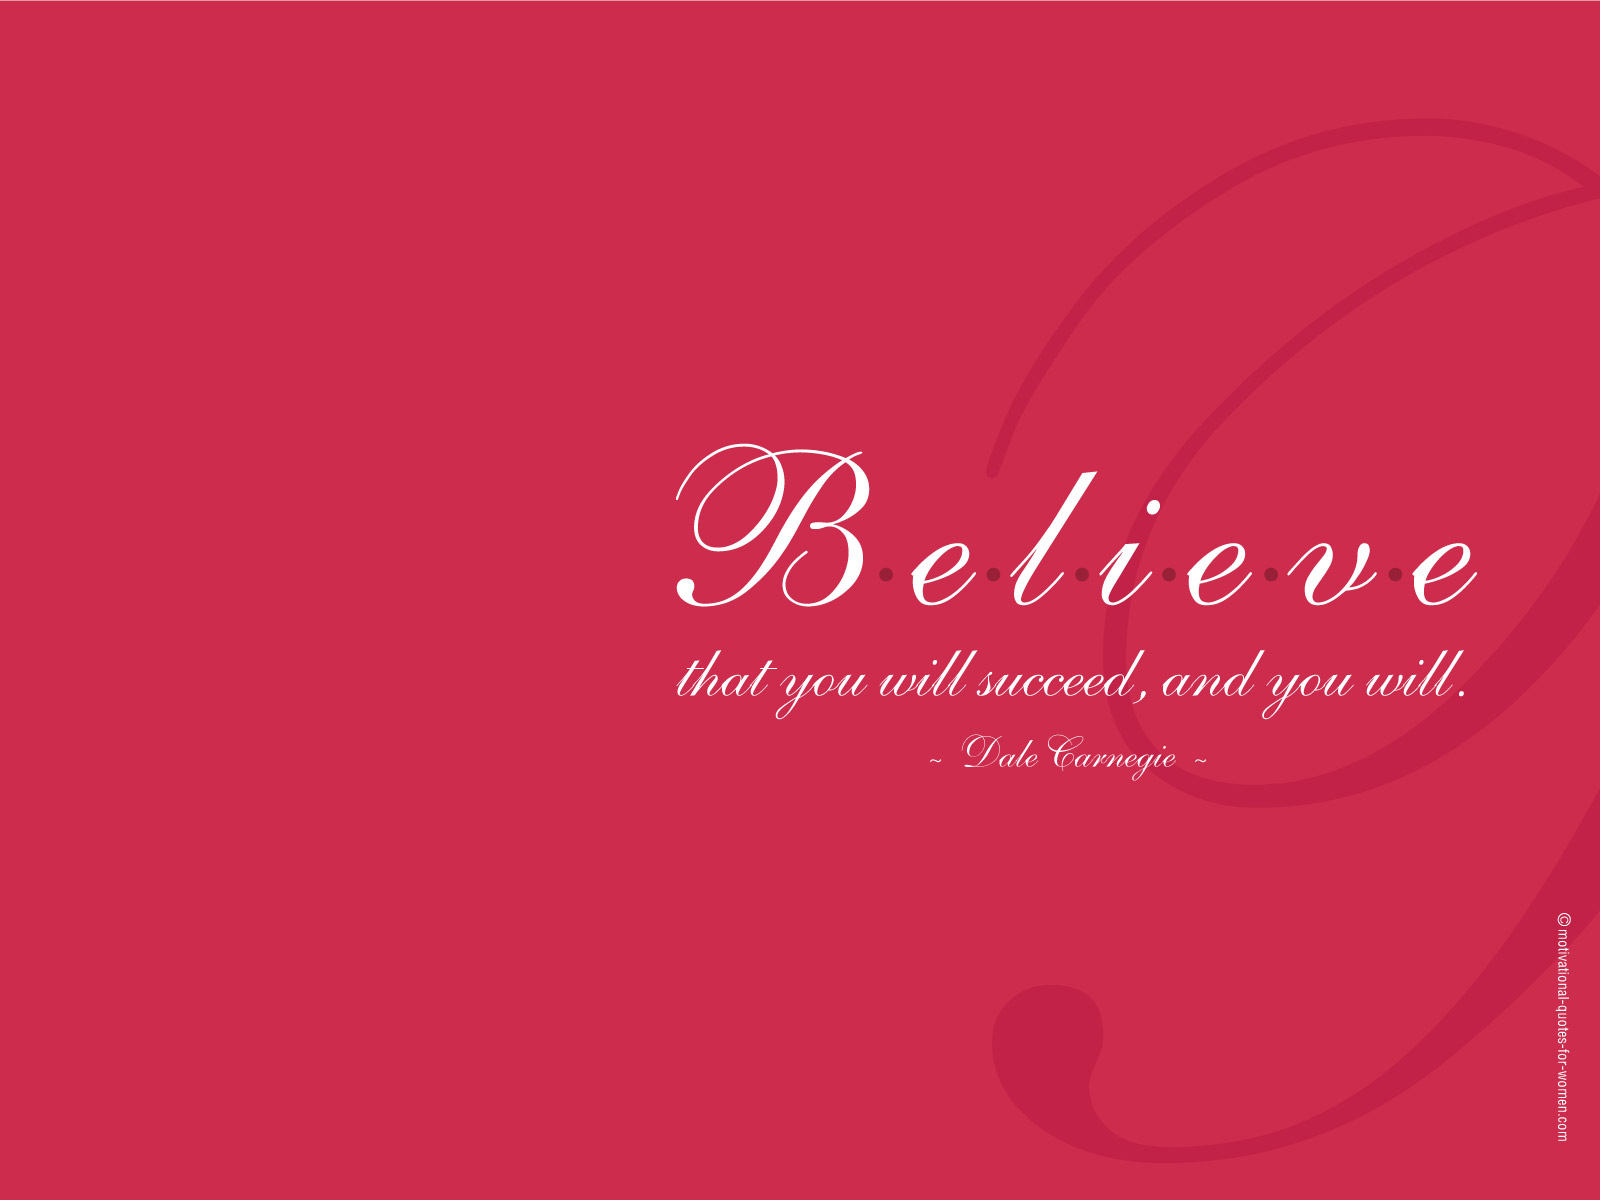 Inspirational Believe Quotes Wallpaper Inspiration Bwalles